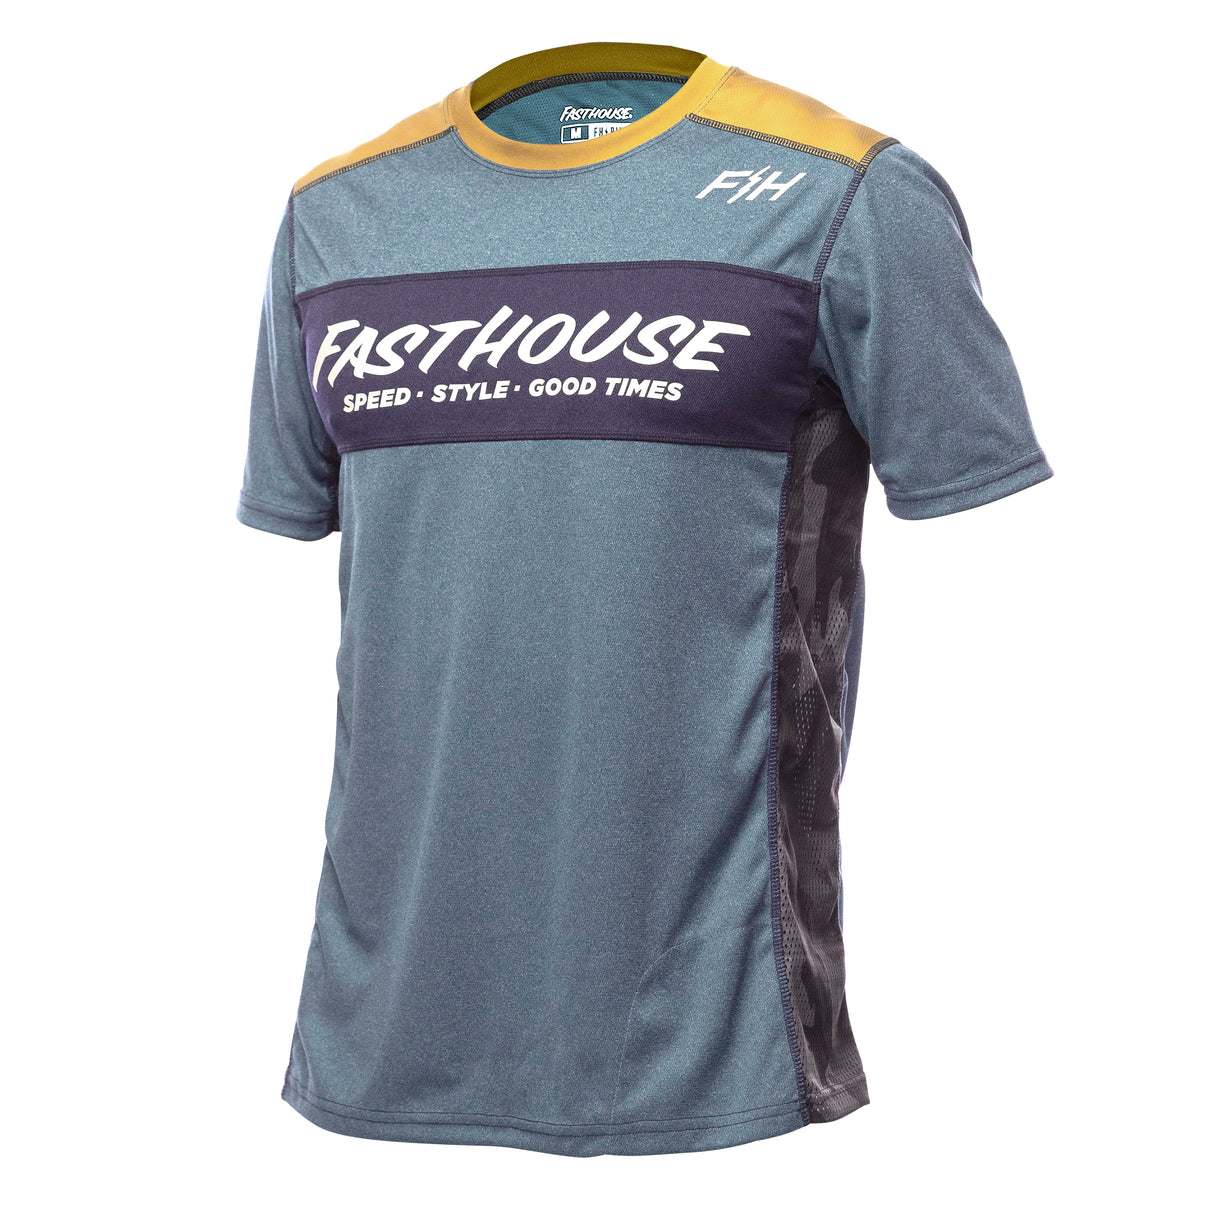 Fasthouse Classic Acadia Short Sleeve Jersey